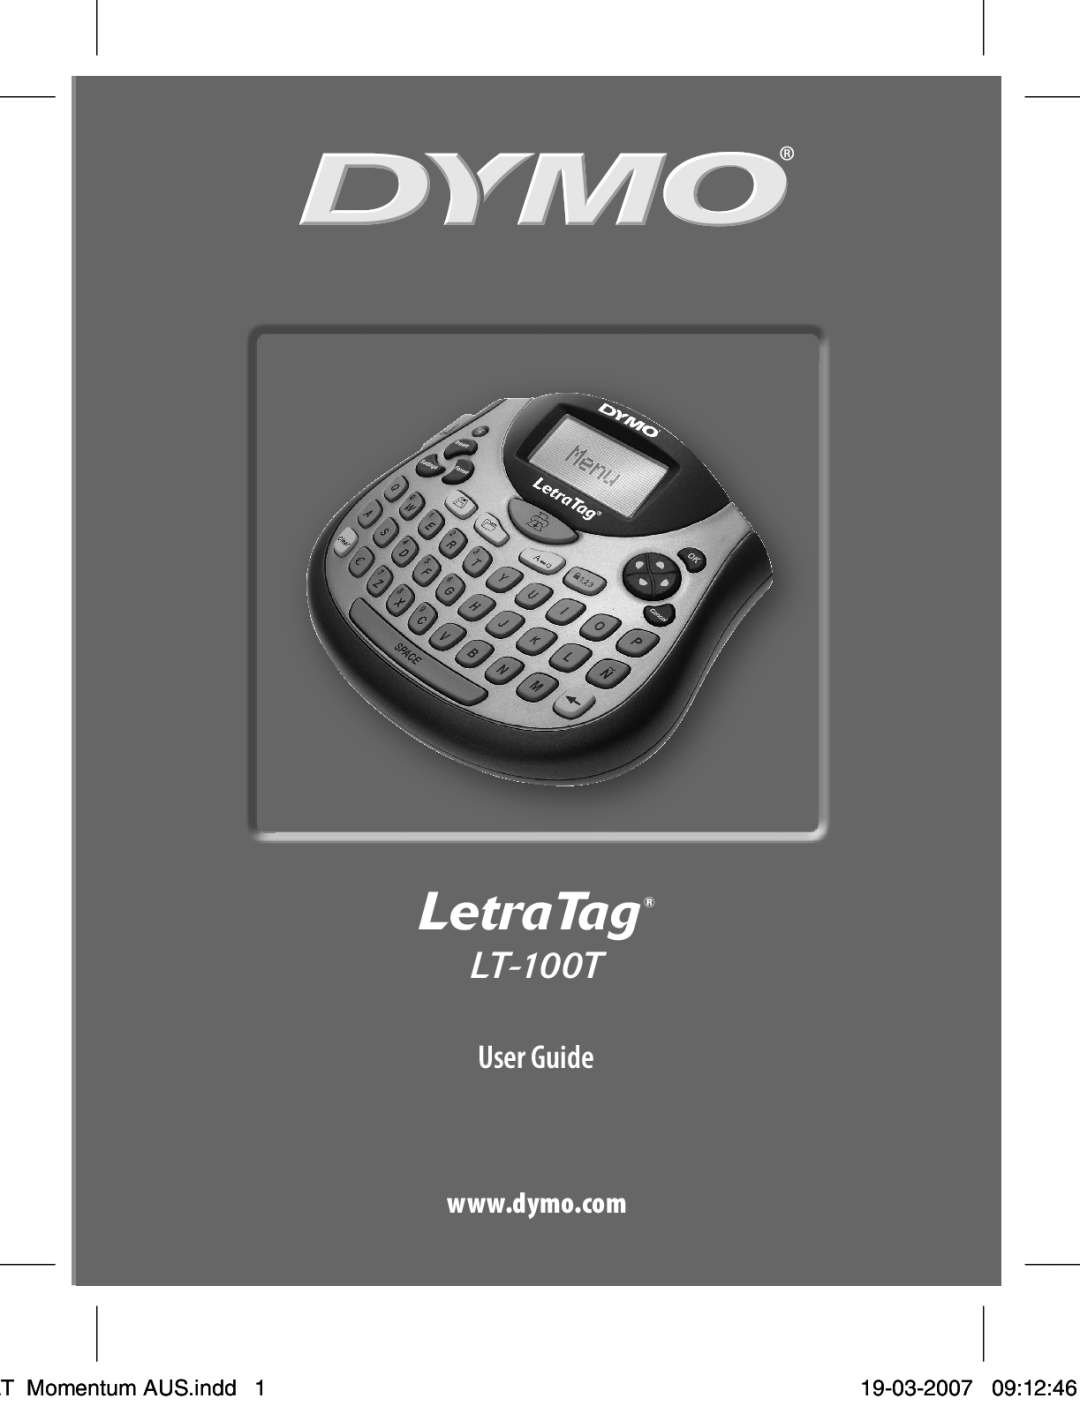 Dymo LT-100T manual LetraTag, User Guide, T Momentum AUS.indd, 19-03-2007 